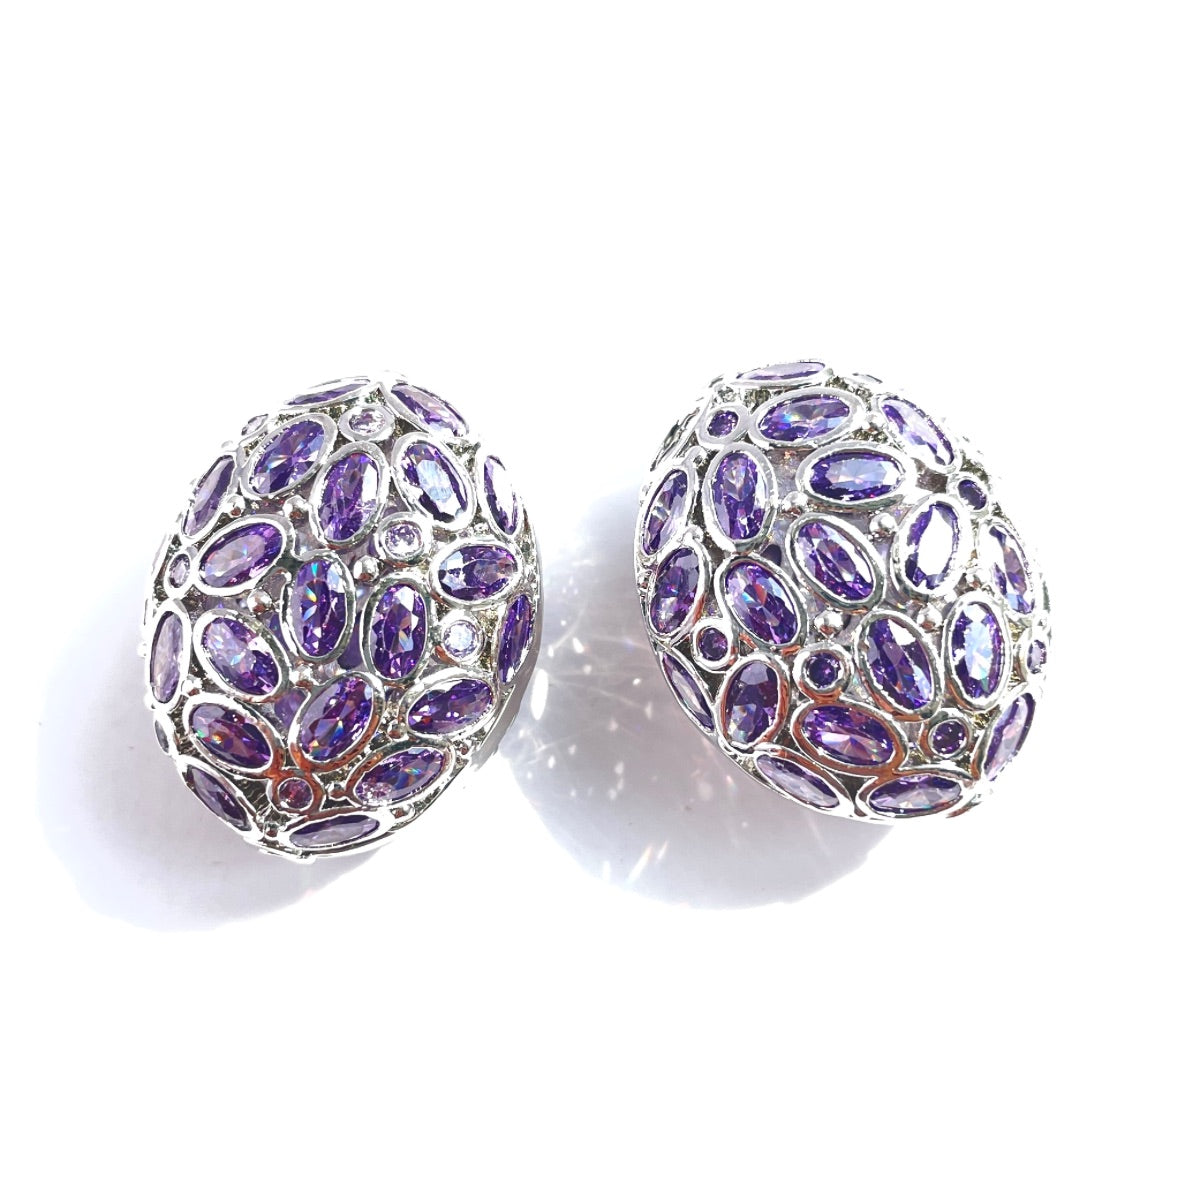 5pc 26.7*21mm Big Size Purple CZ Hollow Flat Oval Centerpiece CZ Egg Beads Spacers Purple on Silver CZ Paved Spacers Egg Beads Charms Beads Beyond